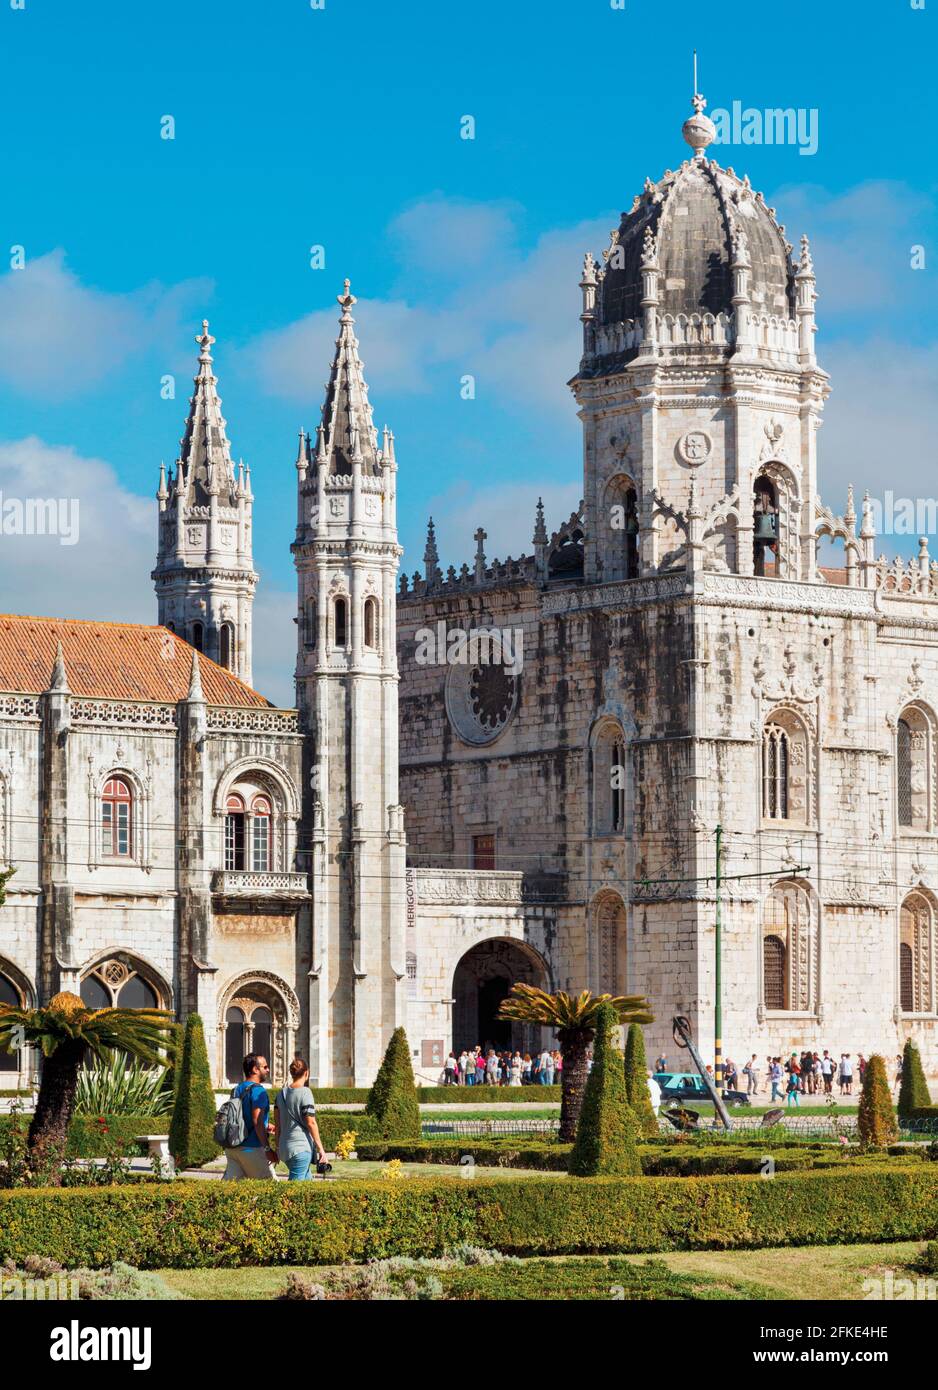 Lisbon, Portugal. The Mosteiro dos Jeronimos, or the Monastery of the Hieronymites. The monastery is considered a triumph of Manueline architecture an Stock Photo